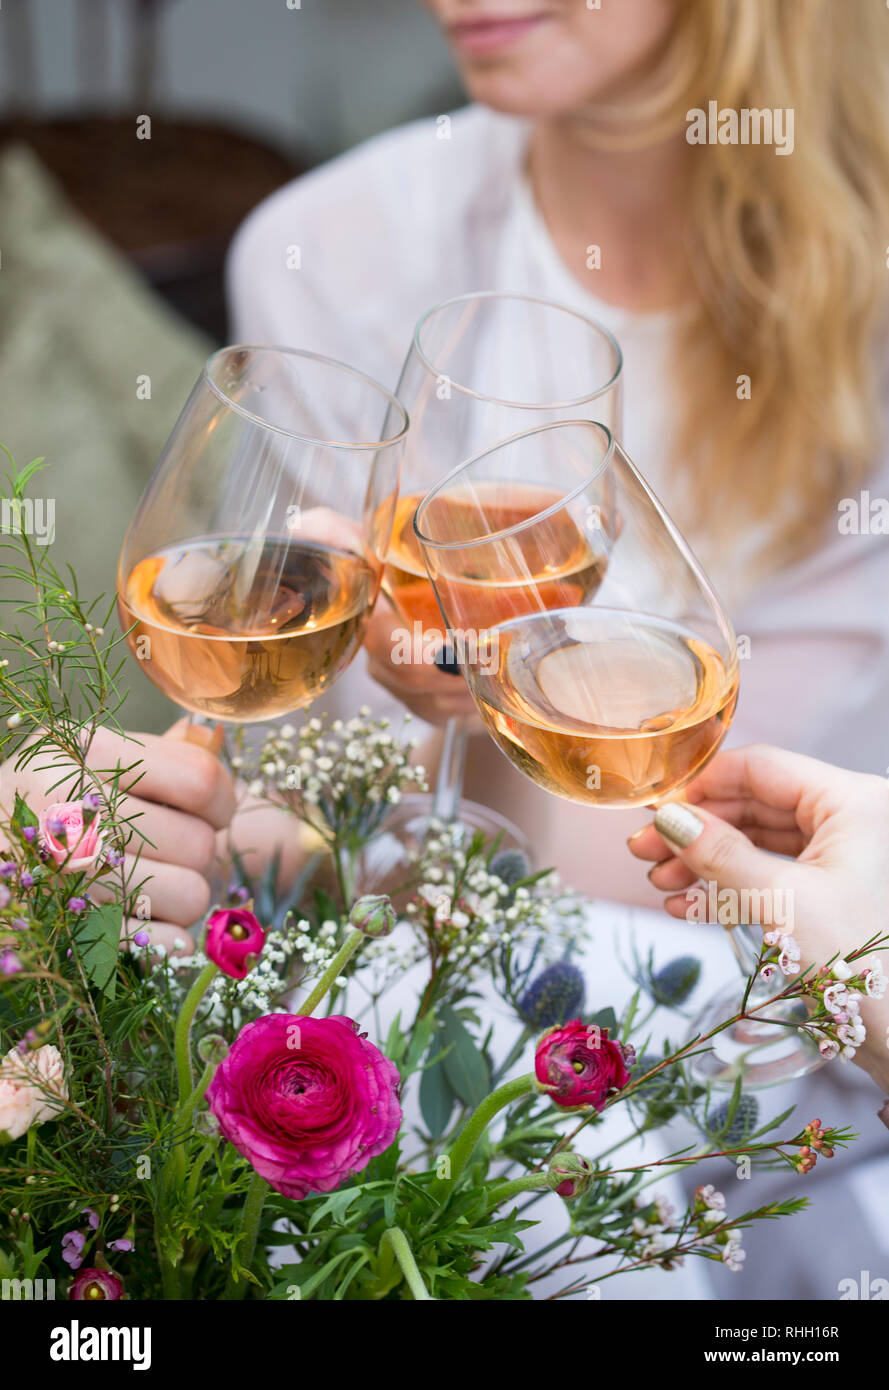 blonde woman toasting friends with wine glasses of rose and flowers Stock Photo